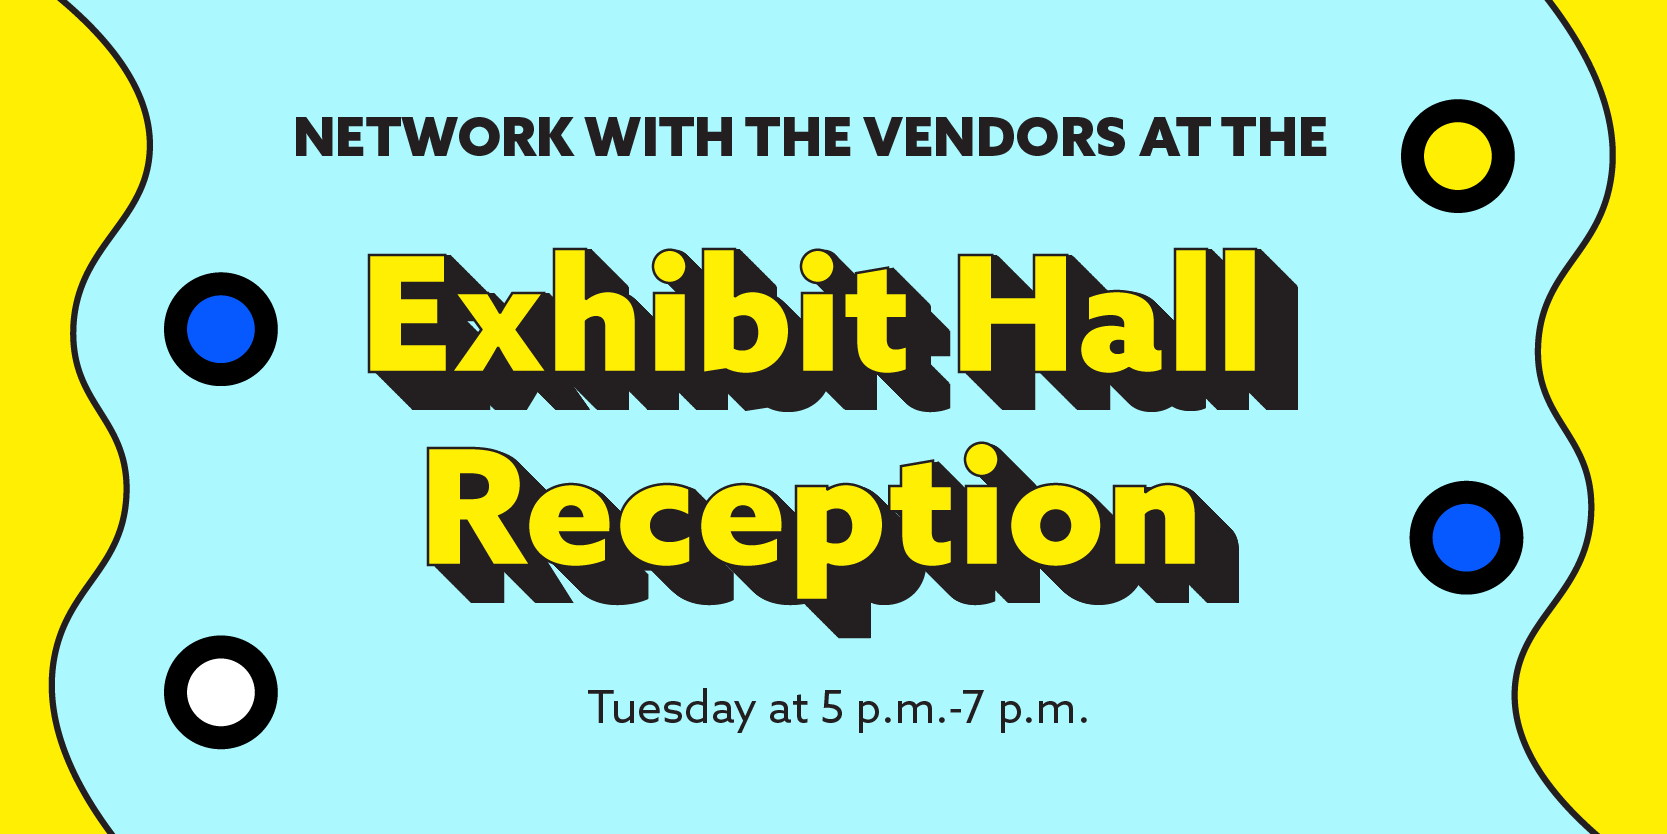 Network with vendors at the exhibit hall reception Tuesday from 5-7pm